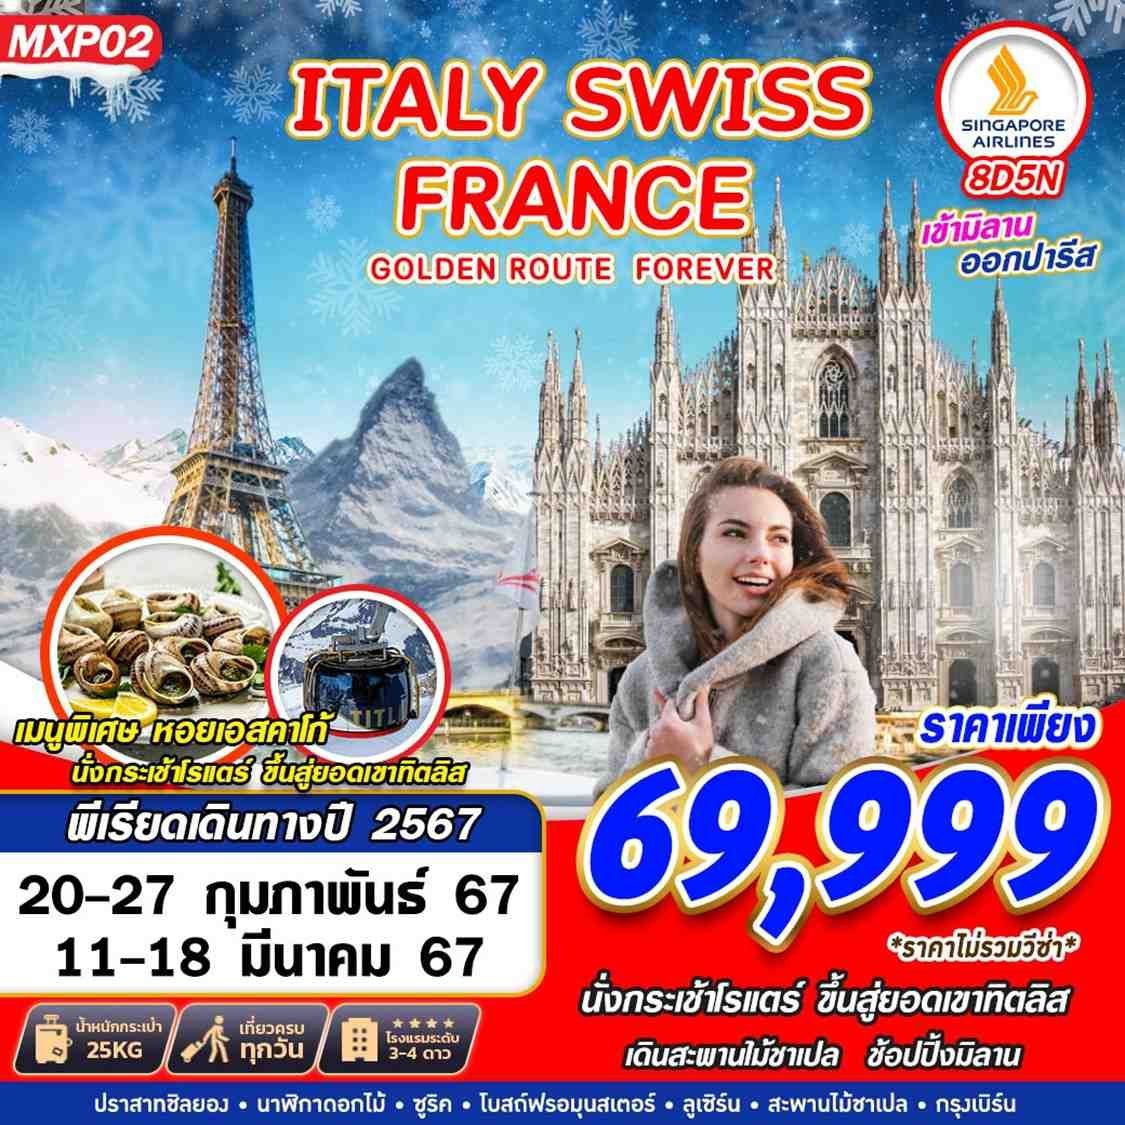 MXP02 GOLDEN ROUTE ITALY SWISS FRANCE  8D5N BY SQ